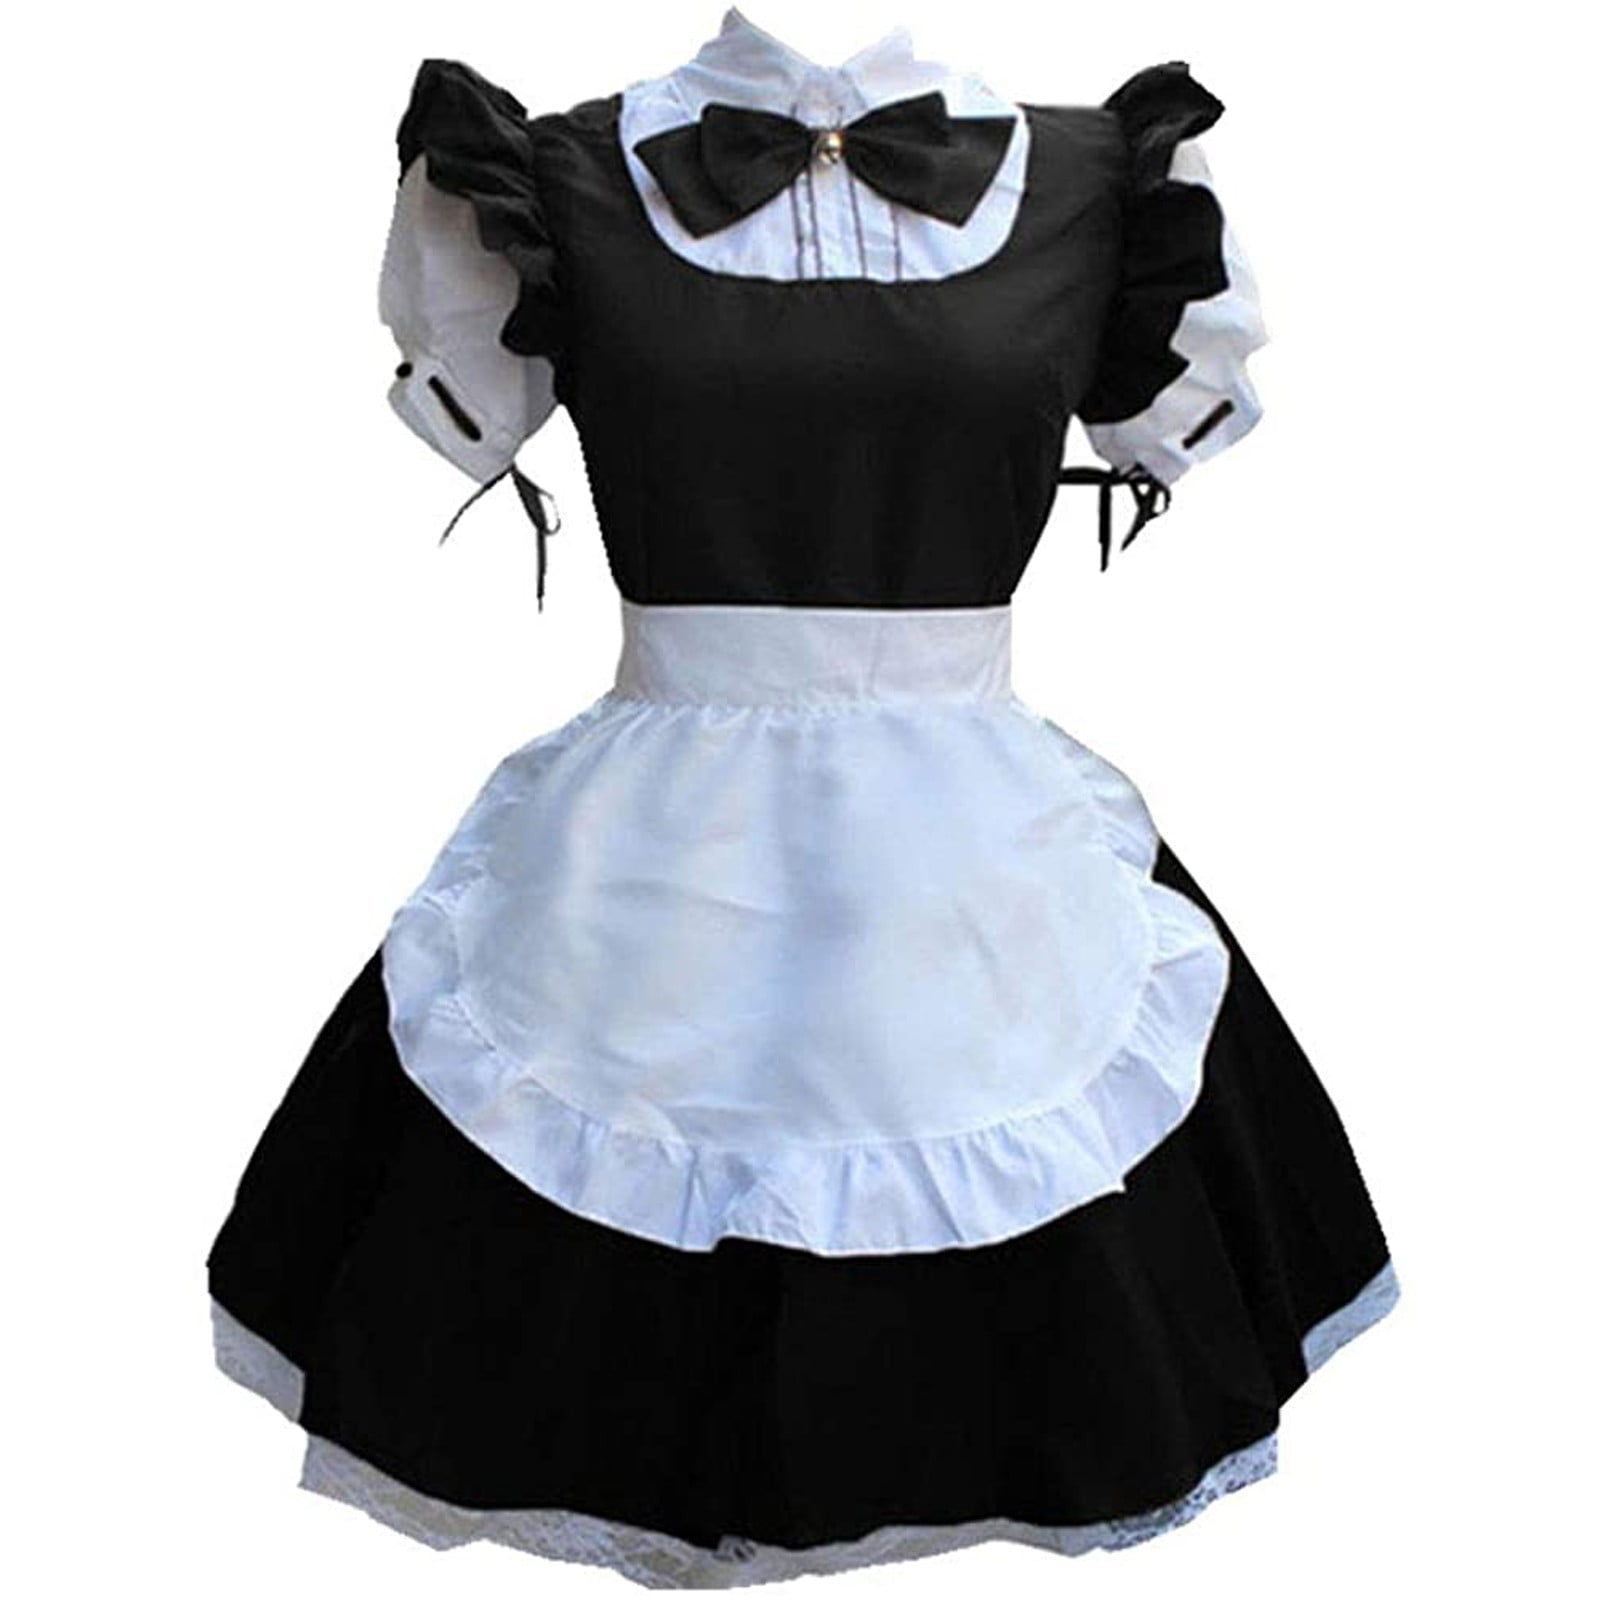 Lady Lolita Waitress Costume Maid Outfit Mesh Dress Ruffle Cosplay Lingerie Chic 